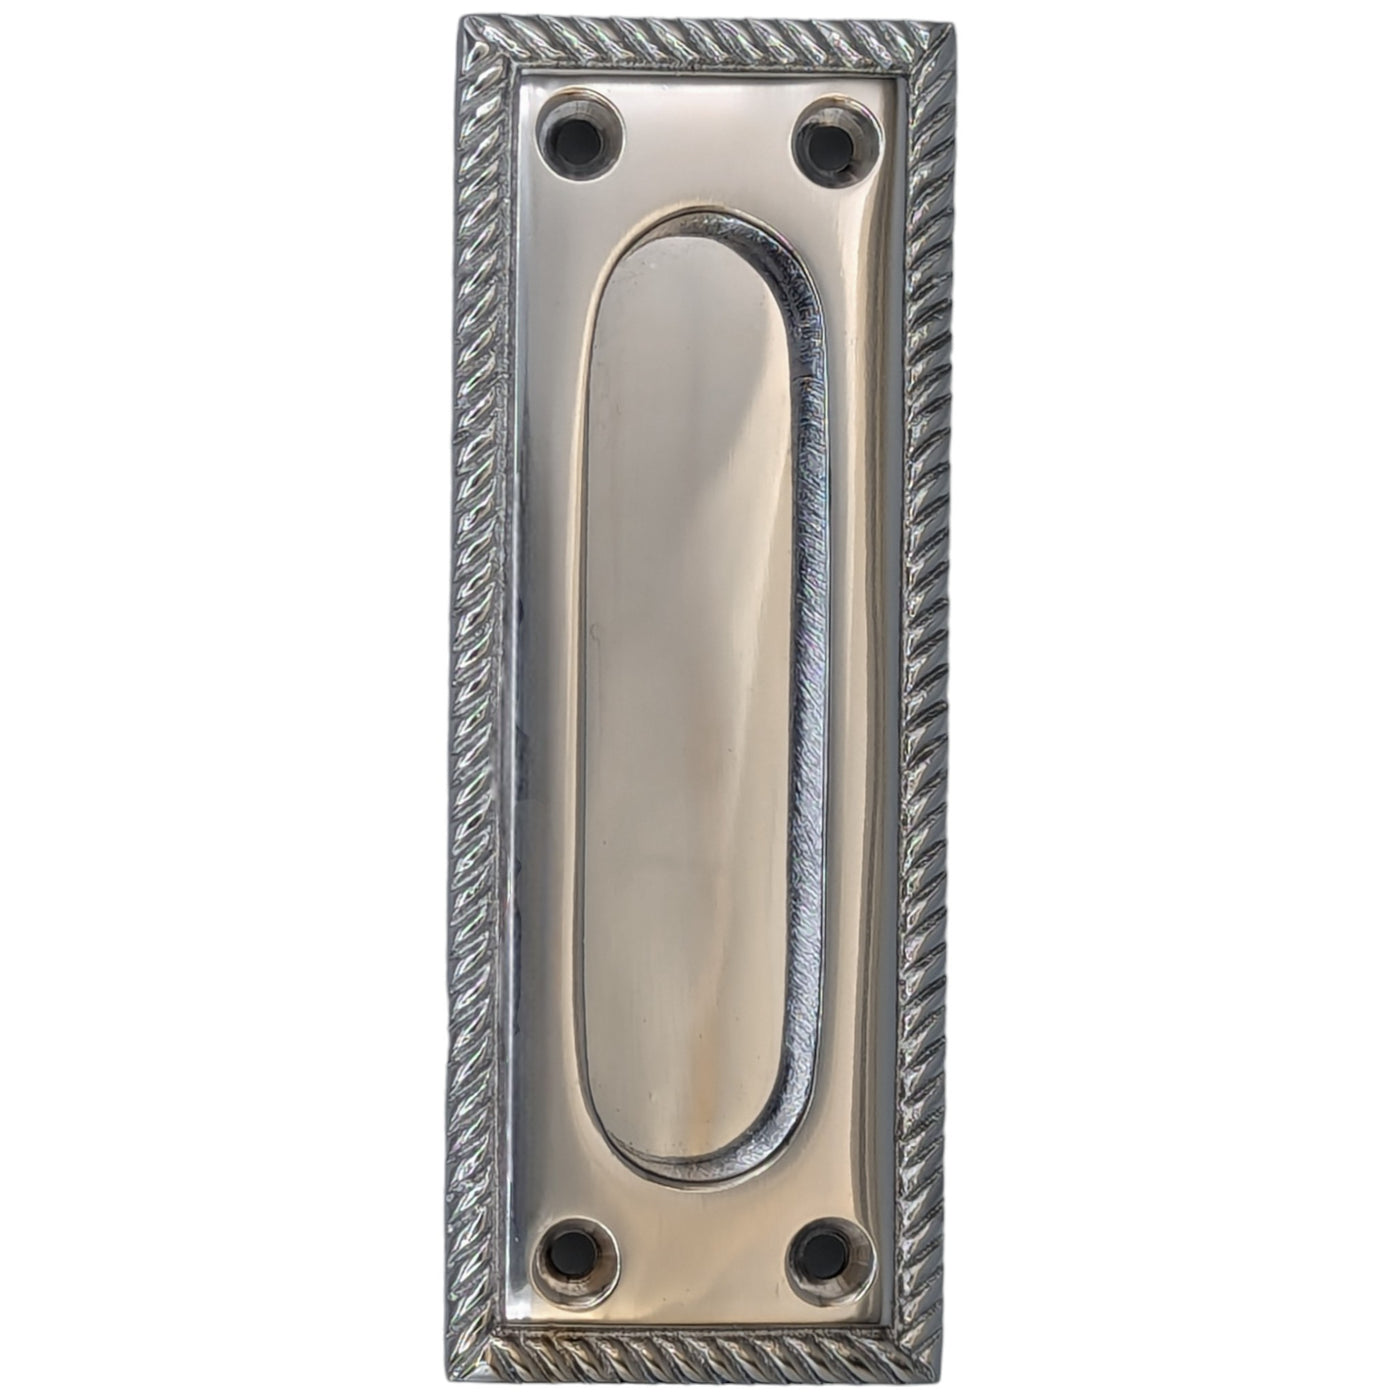 Georgian Rope Rectangular Pocket Door Pull (Several Finishes Available)